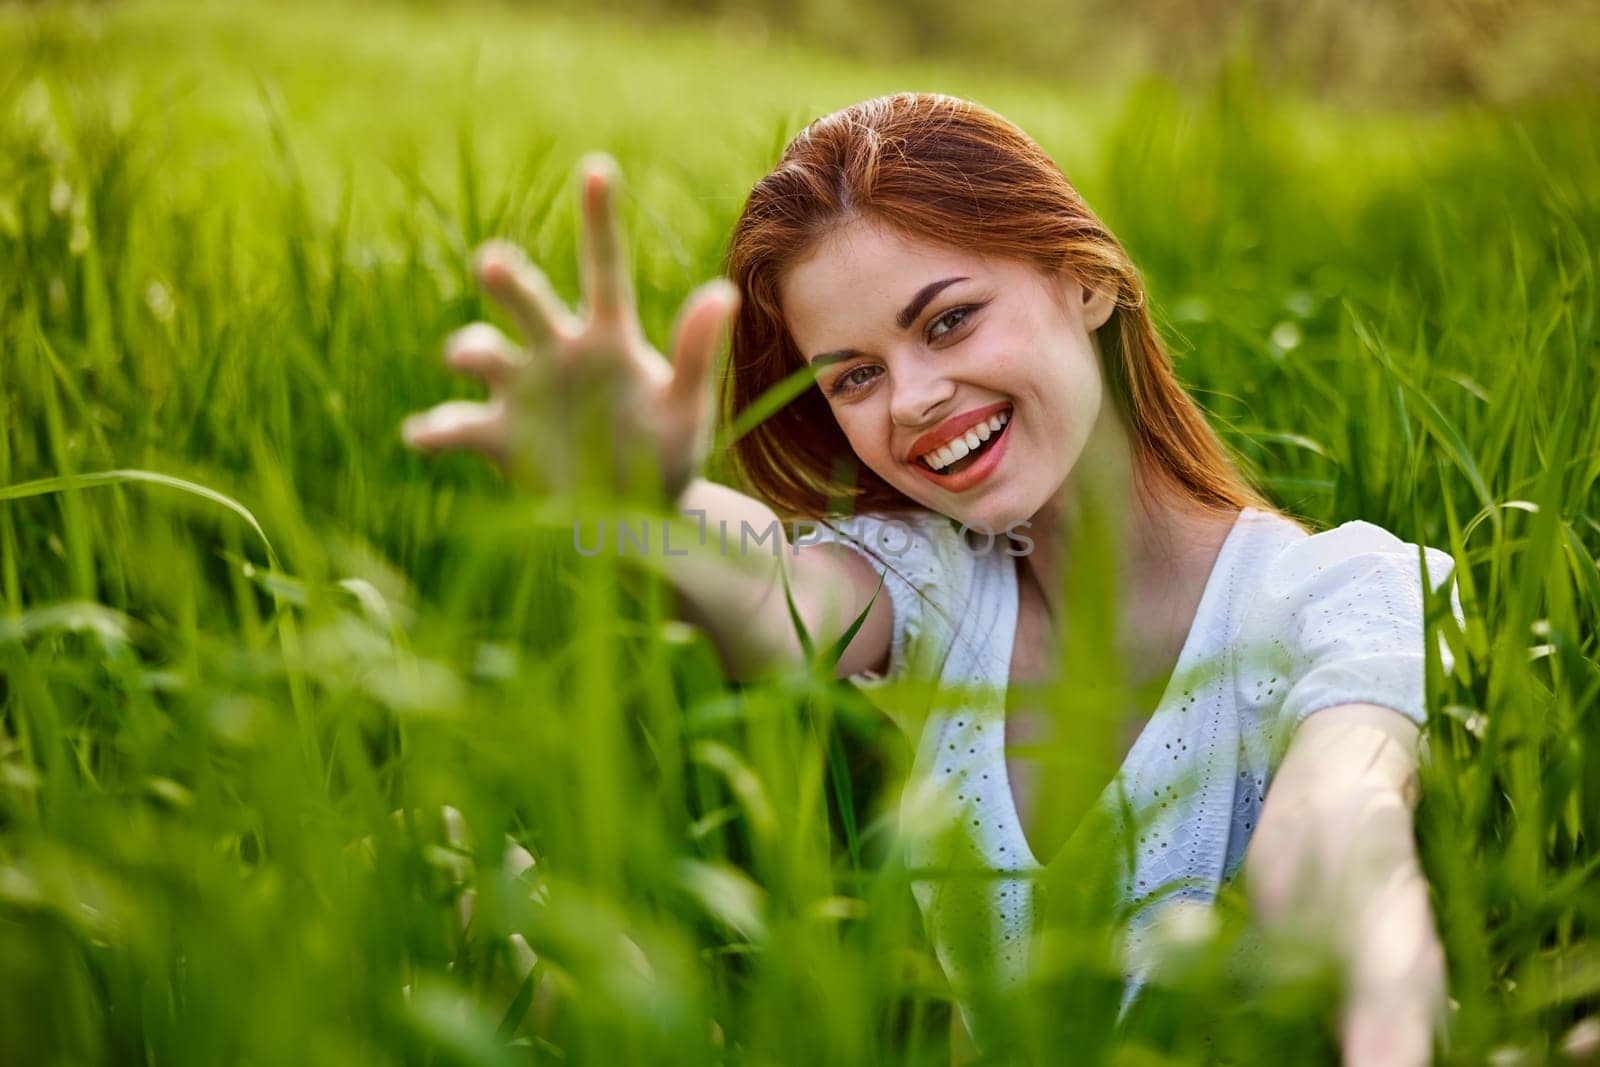 portrait of a broadly smiling woman sitting in tall grass and holding out her hands to the camera by Vichizh